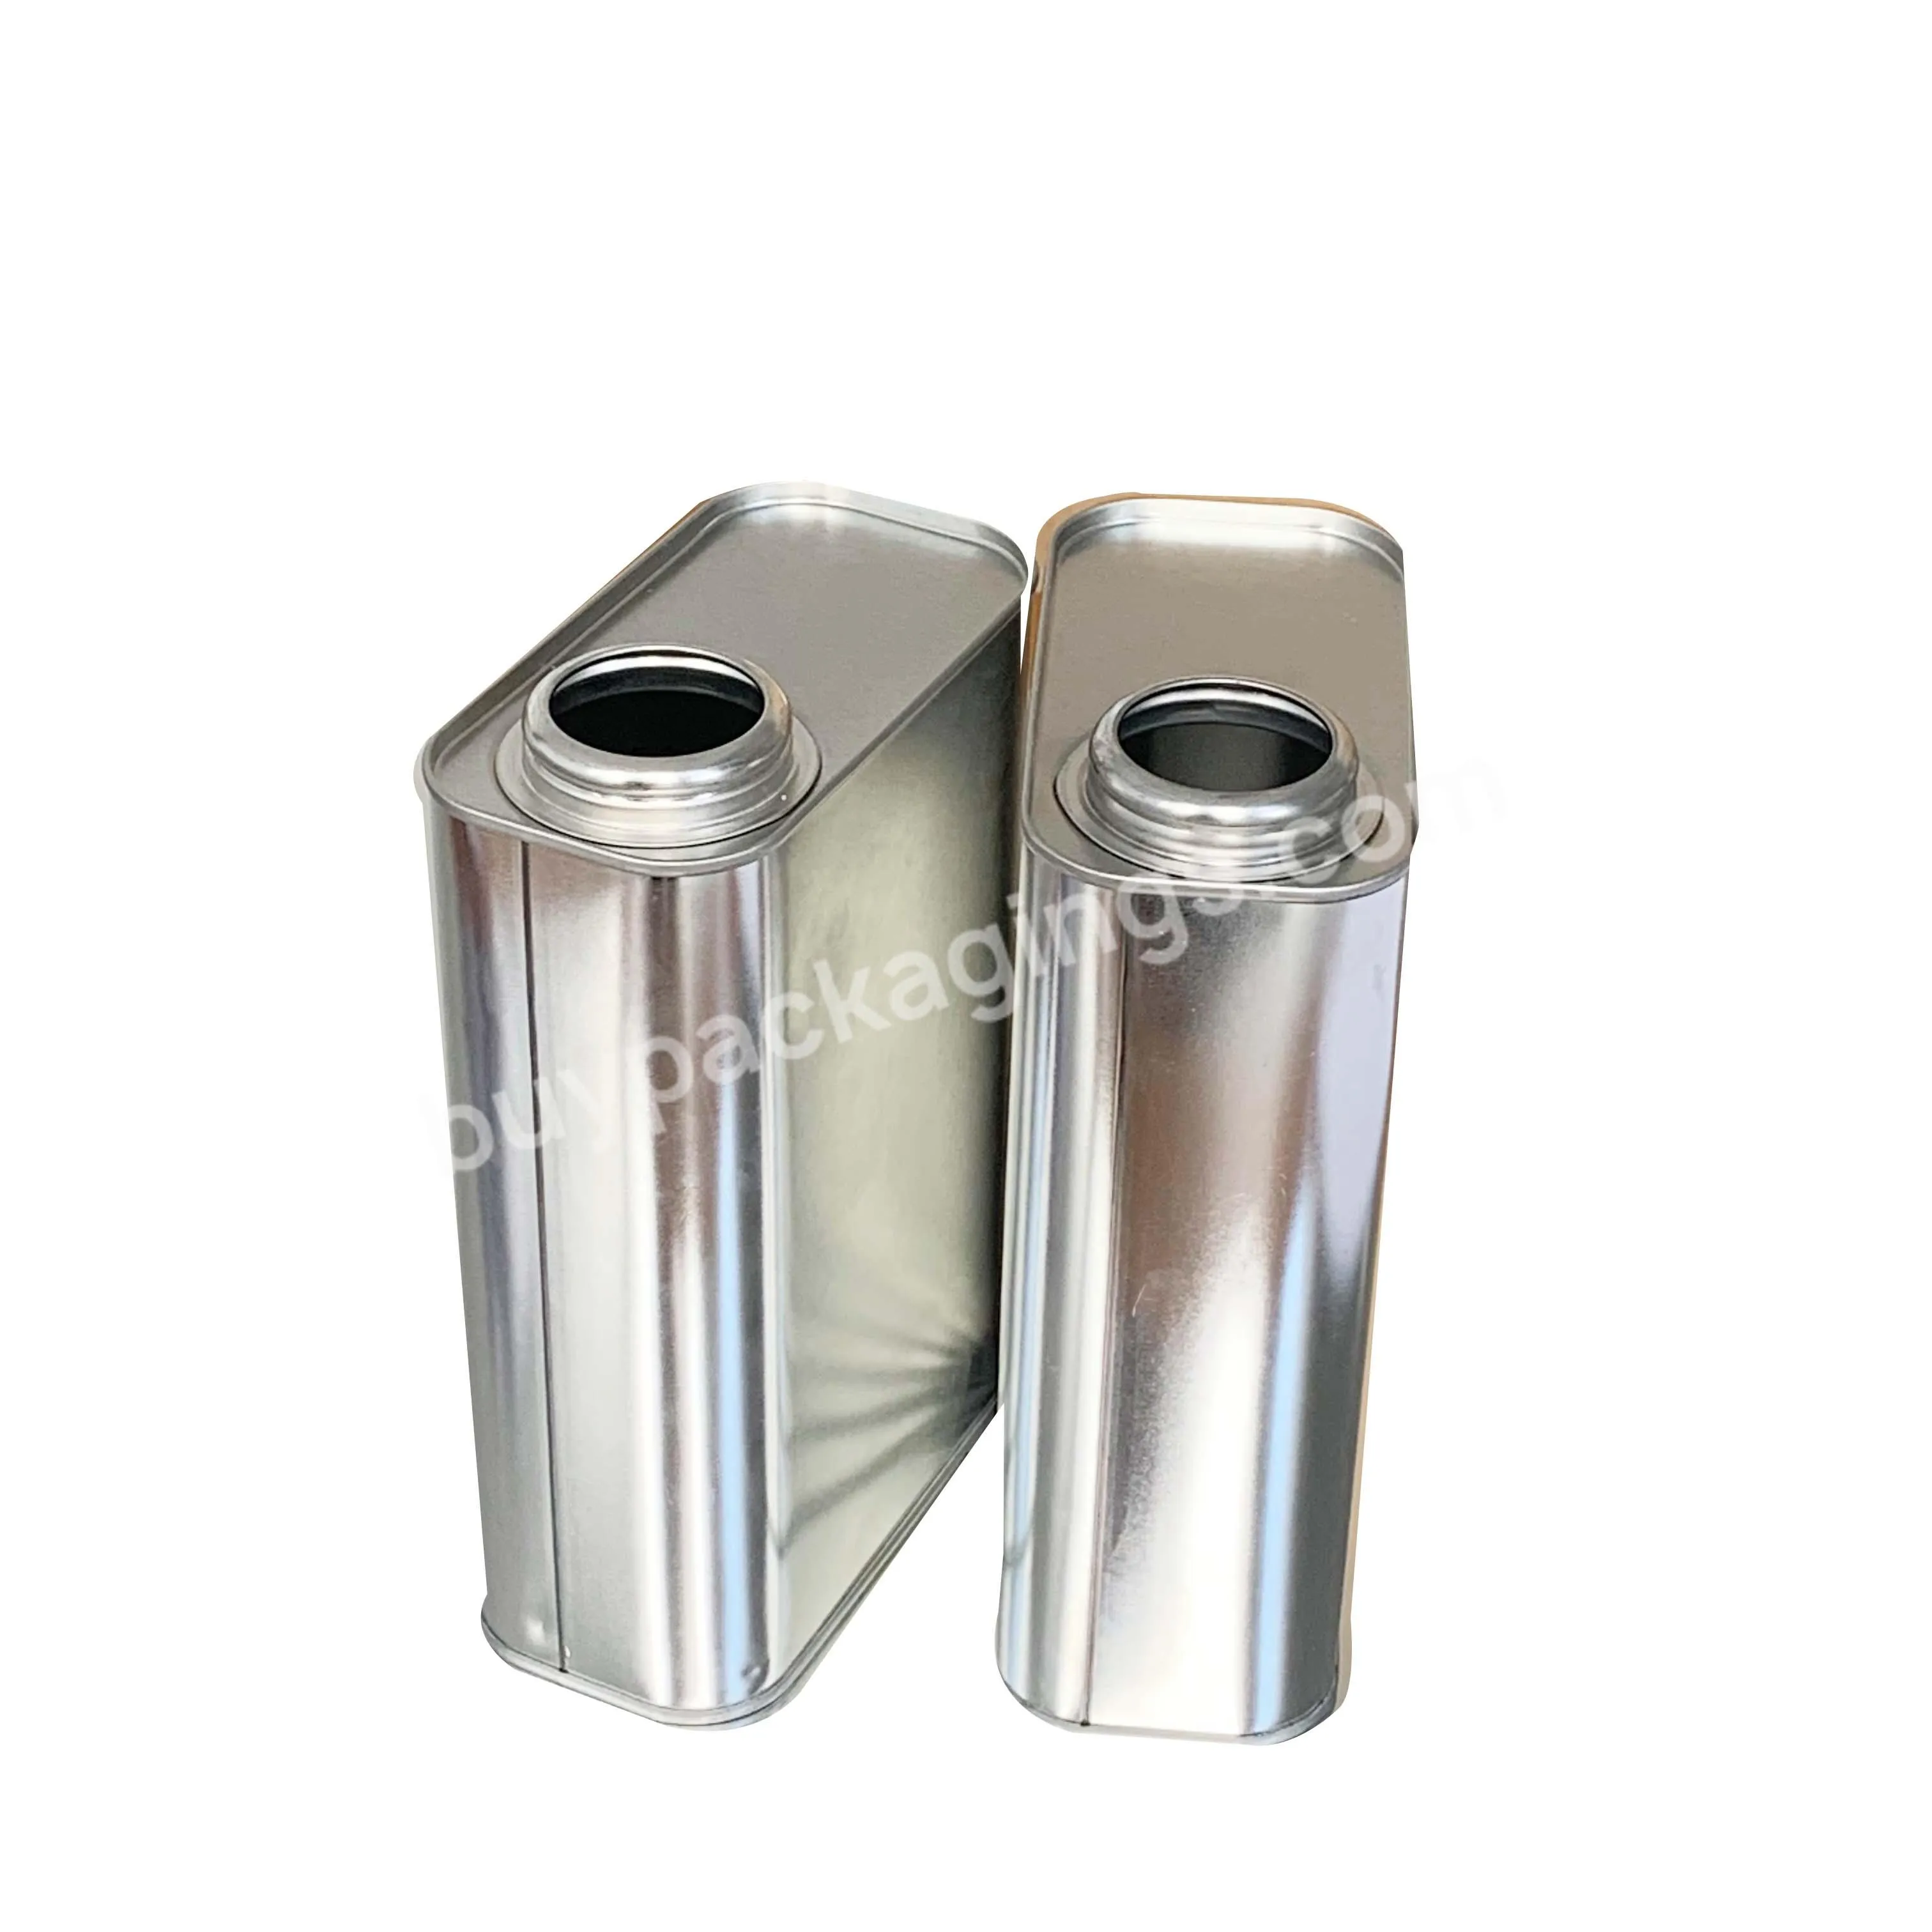 Jt Tin Can For Oil Or Paint Packaging Empty Square Can Freely Sample High Quality Factory Price - Buy Metal Tin Can,Empty Square Can,High Quality Factory Price.